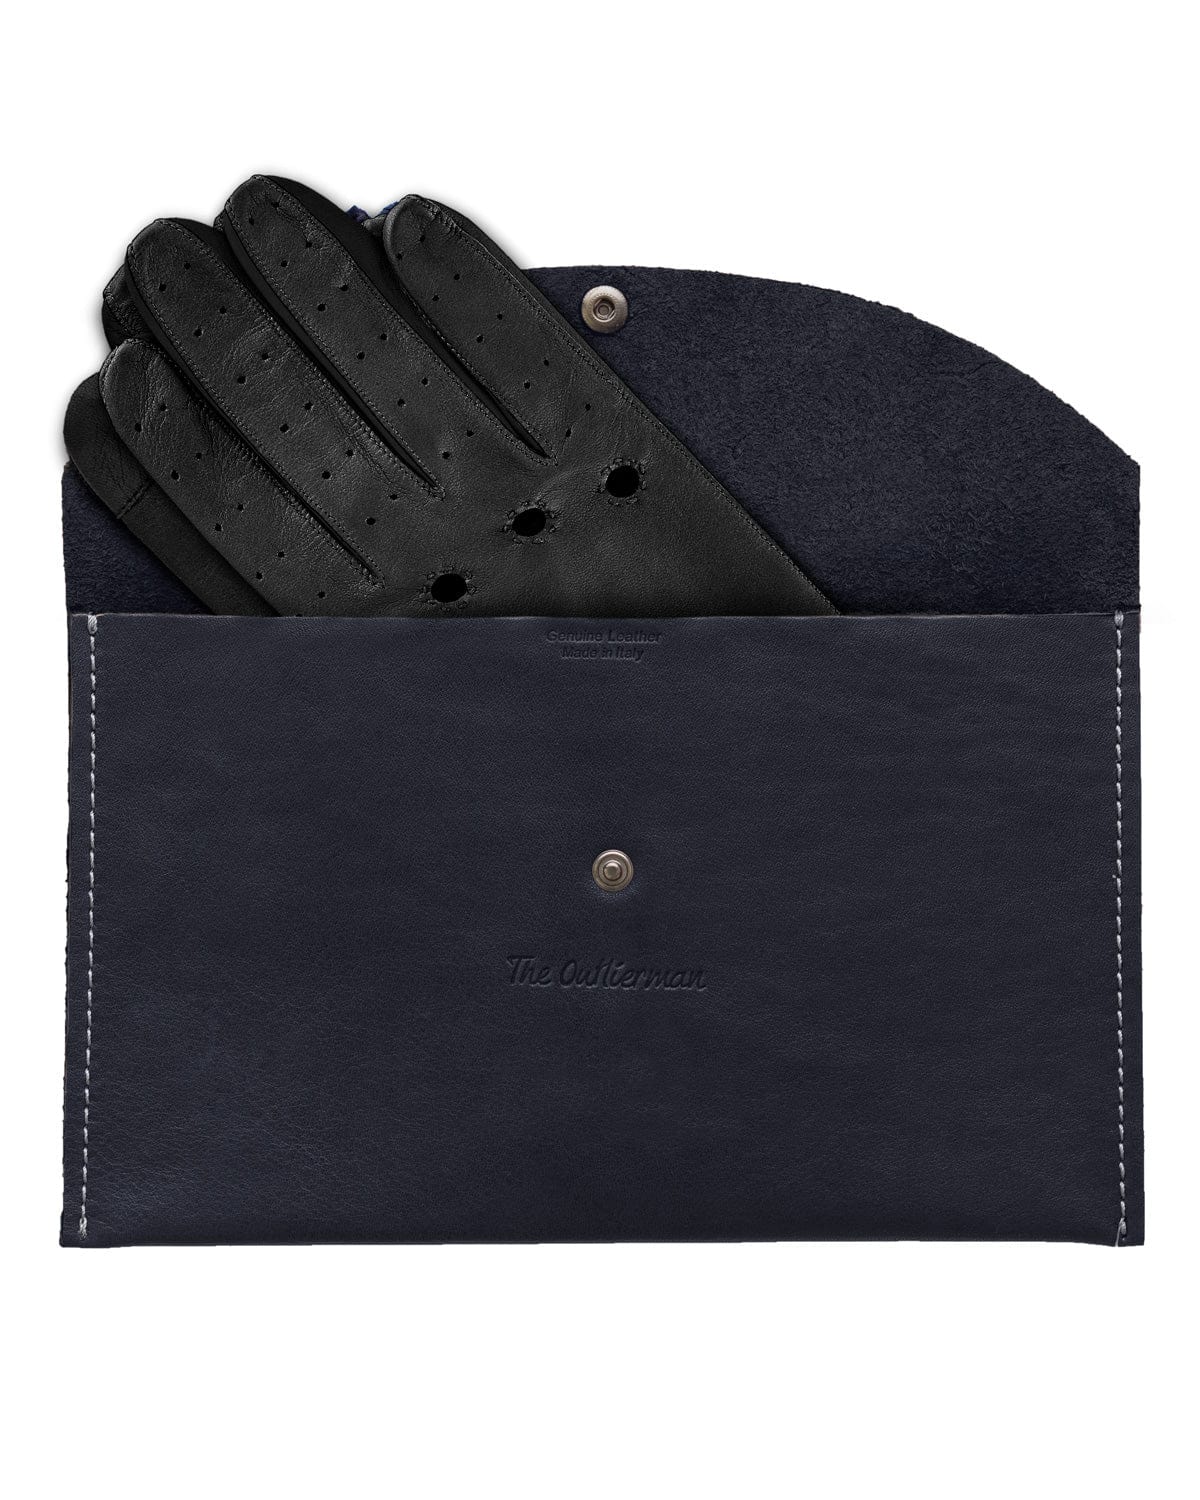 Louis Vuitton Mens Gloves Gloves, Black, 9.5 (Stock Check Required)